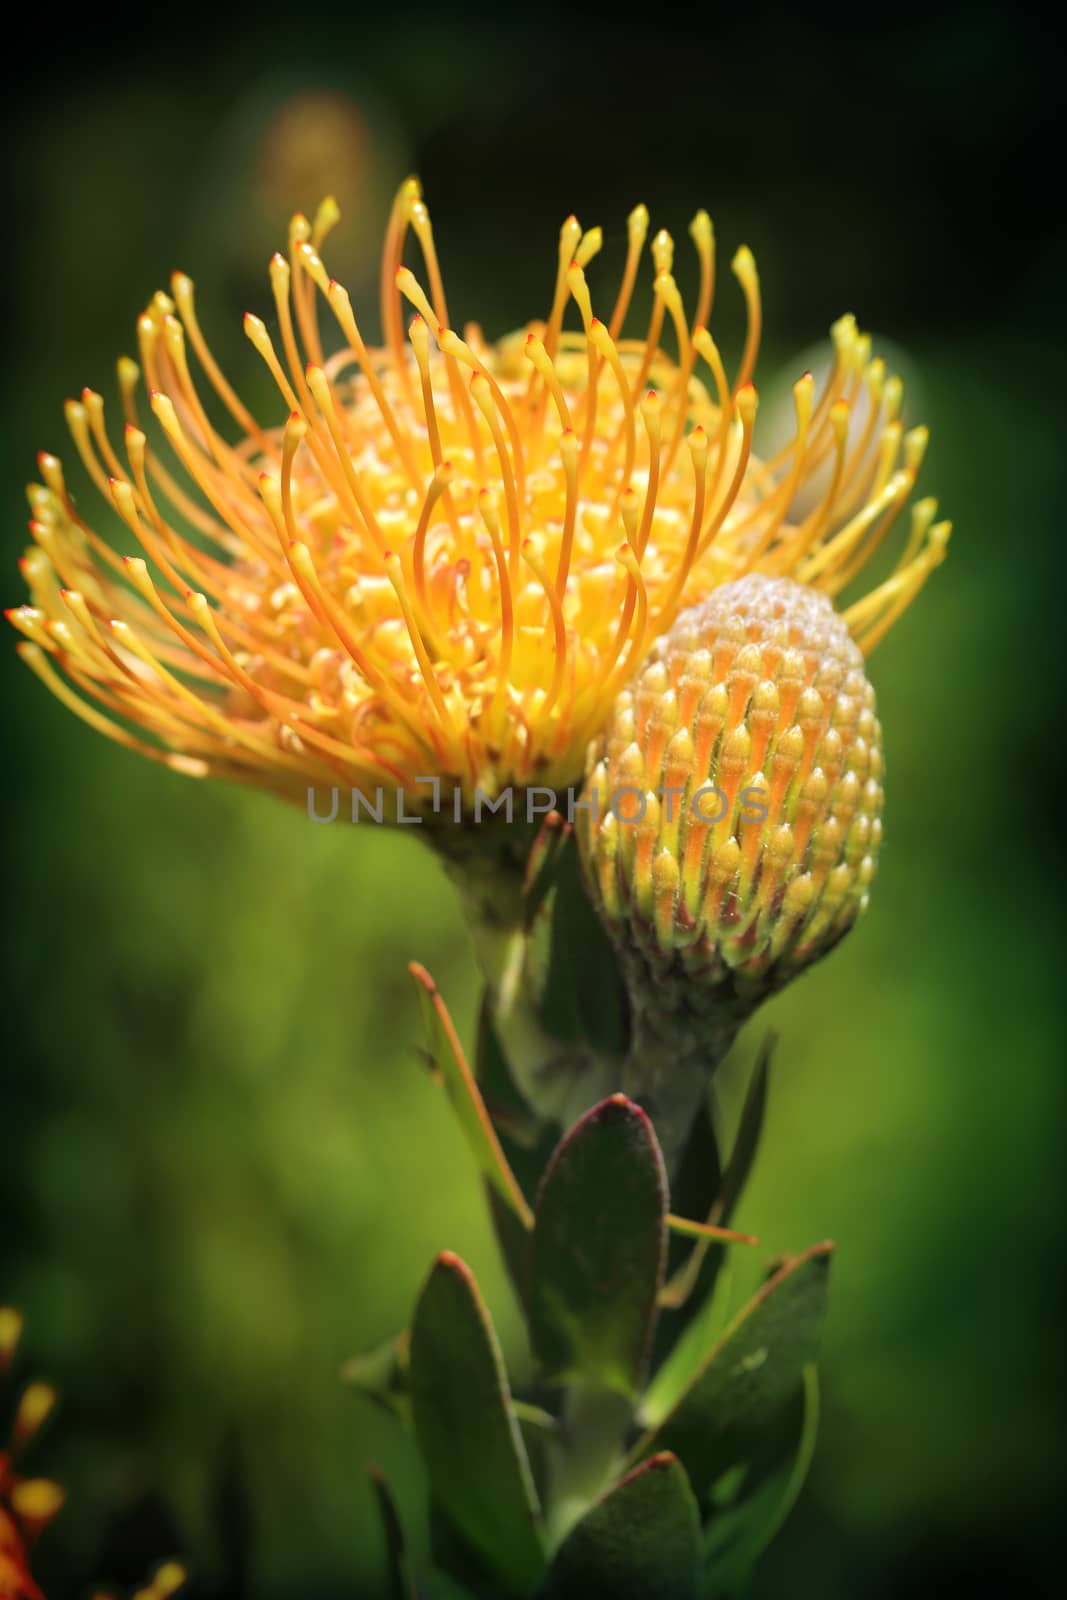 Yellow Pincushion Protea in flower by lovleah